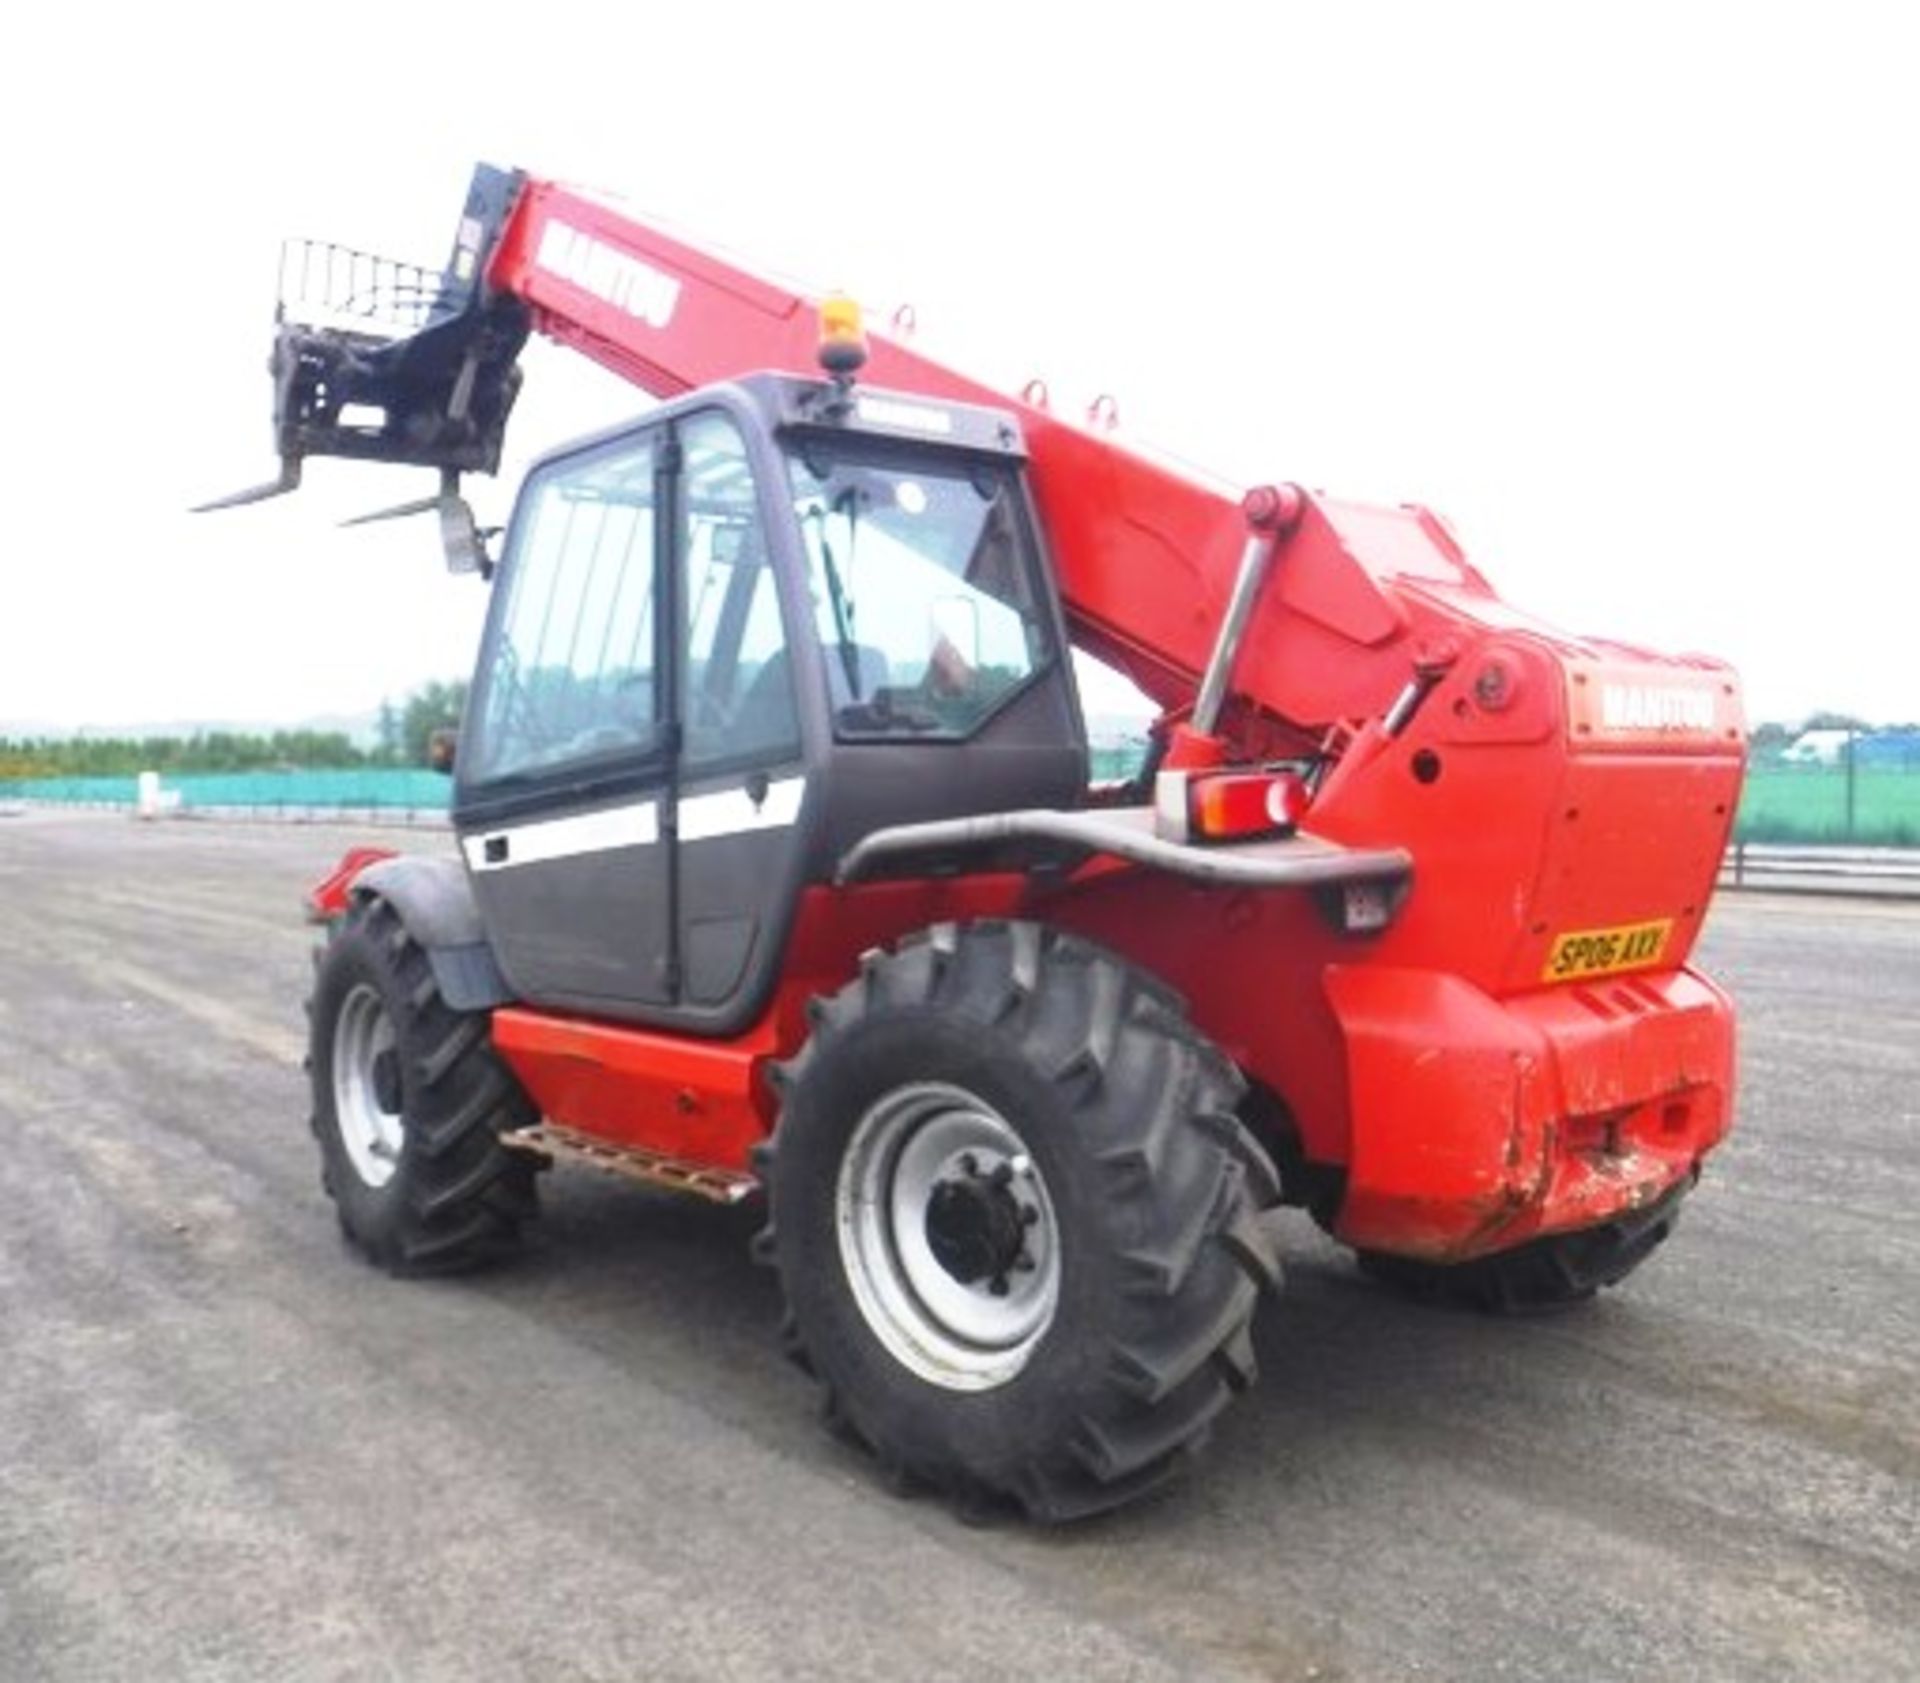 2006 MANITOU 14/35 TELEHANDLER c/w bucket & forks s/n 1230044 Reg no SP06 AXX 2646hrs (not verified) - Image 20 of 31